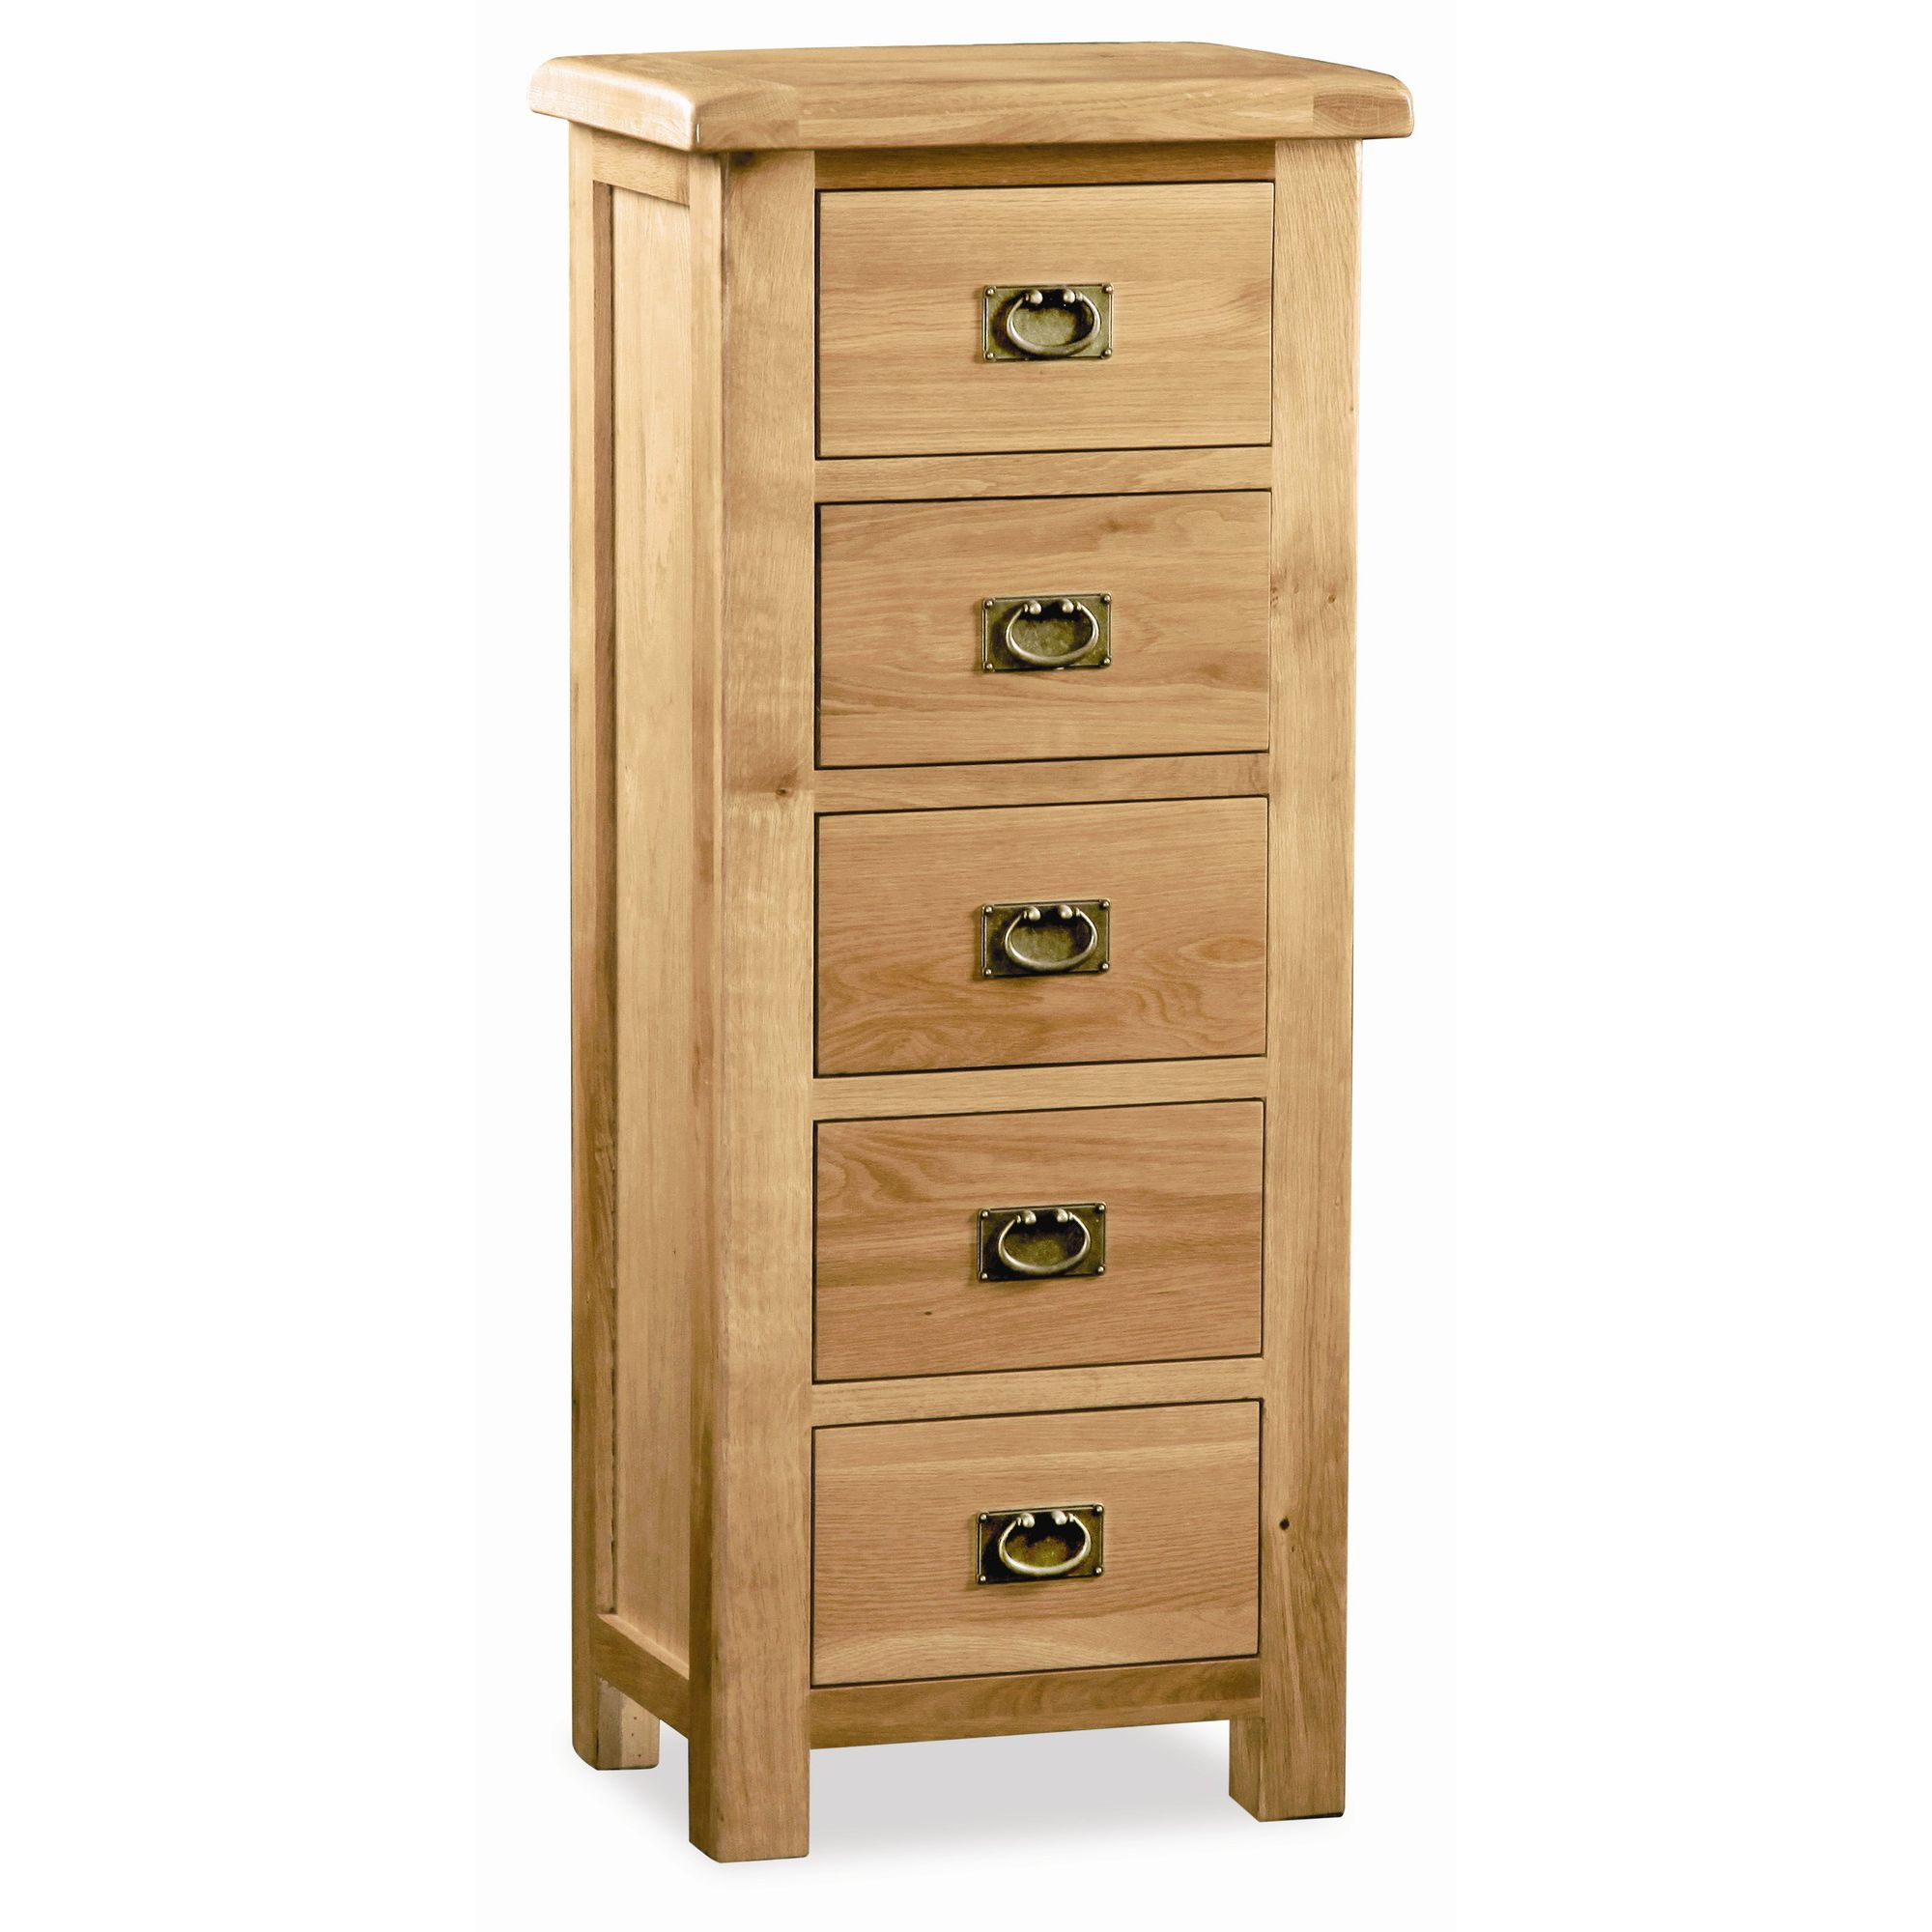 Alterton Furniture Pemberley Tallboy Chest at Tesco Direct